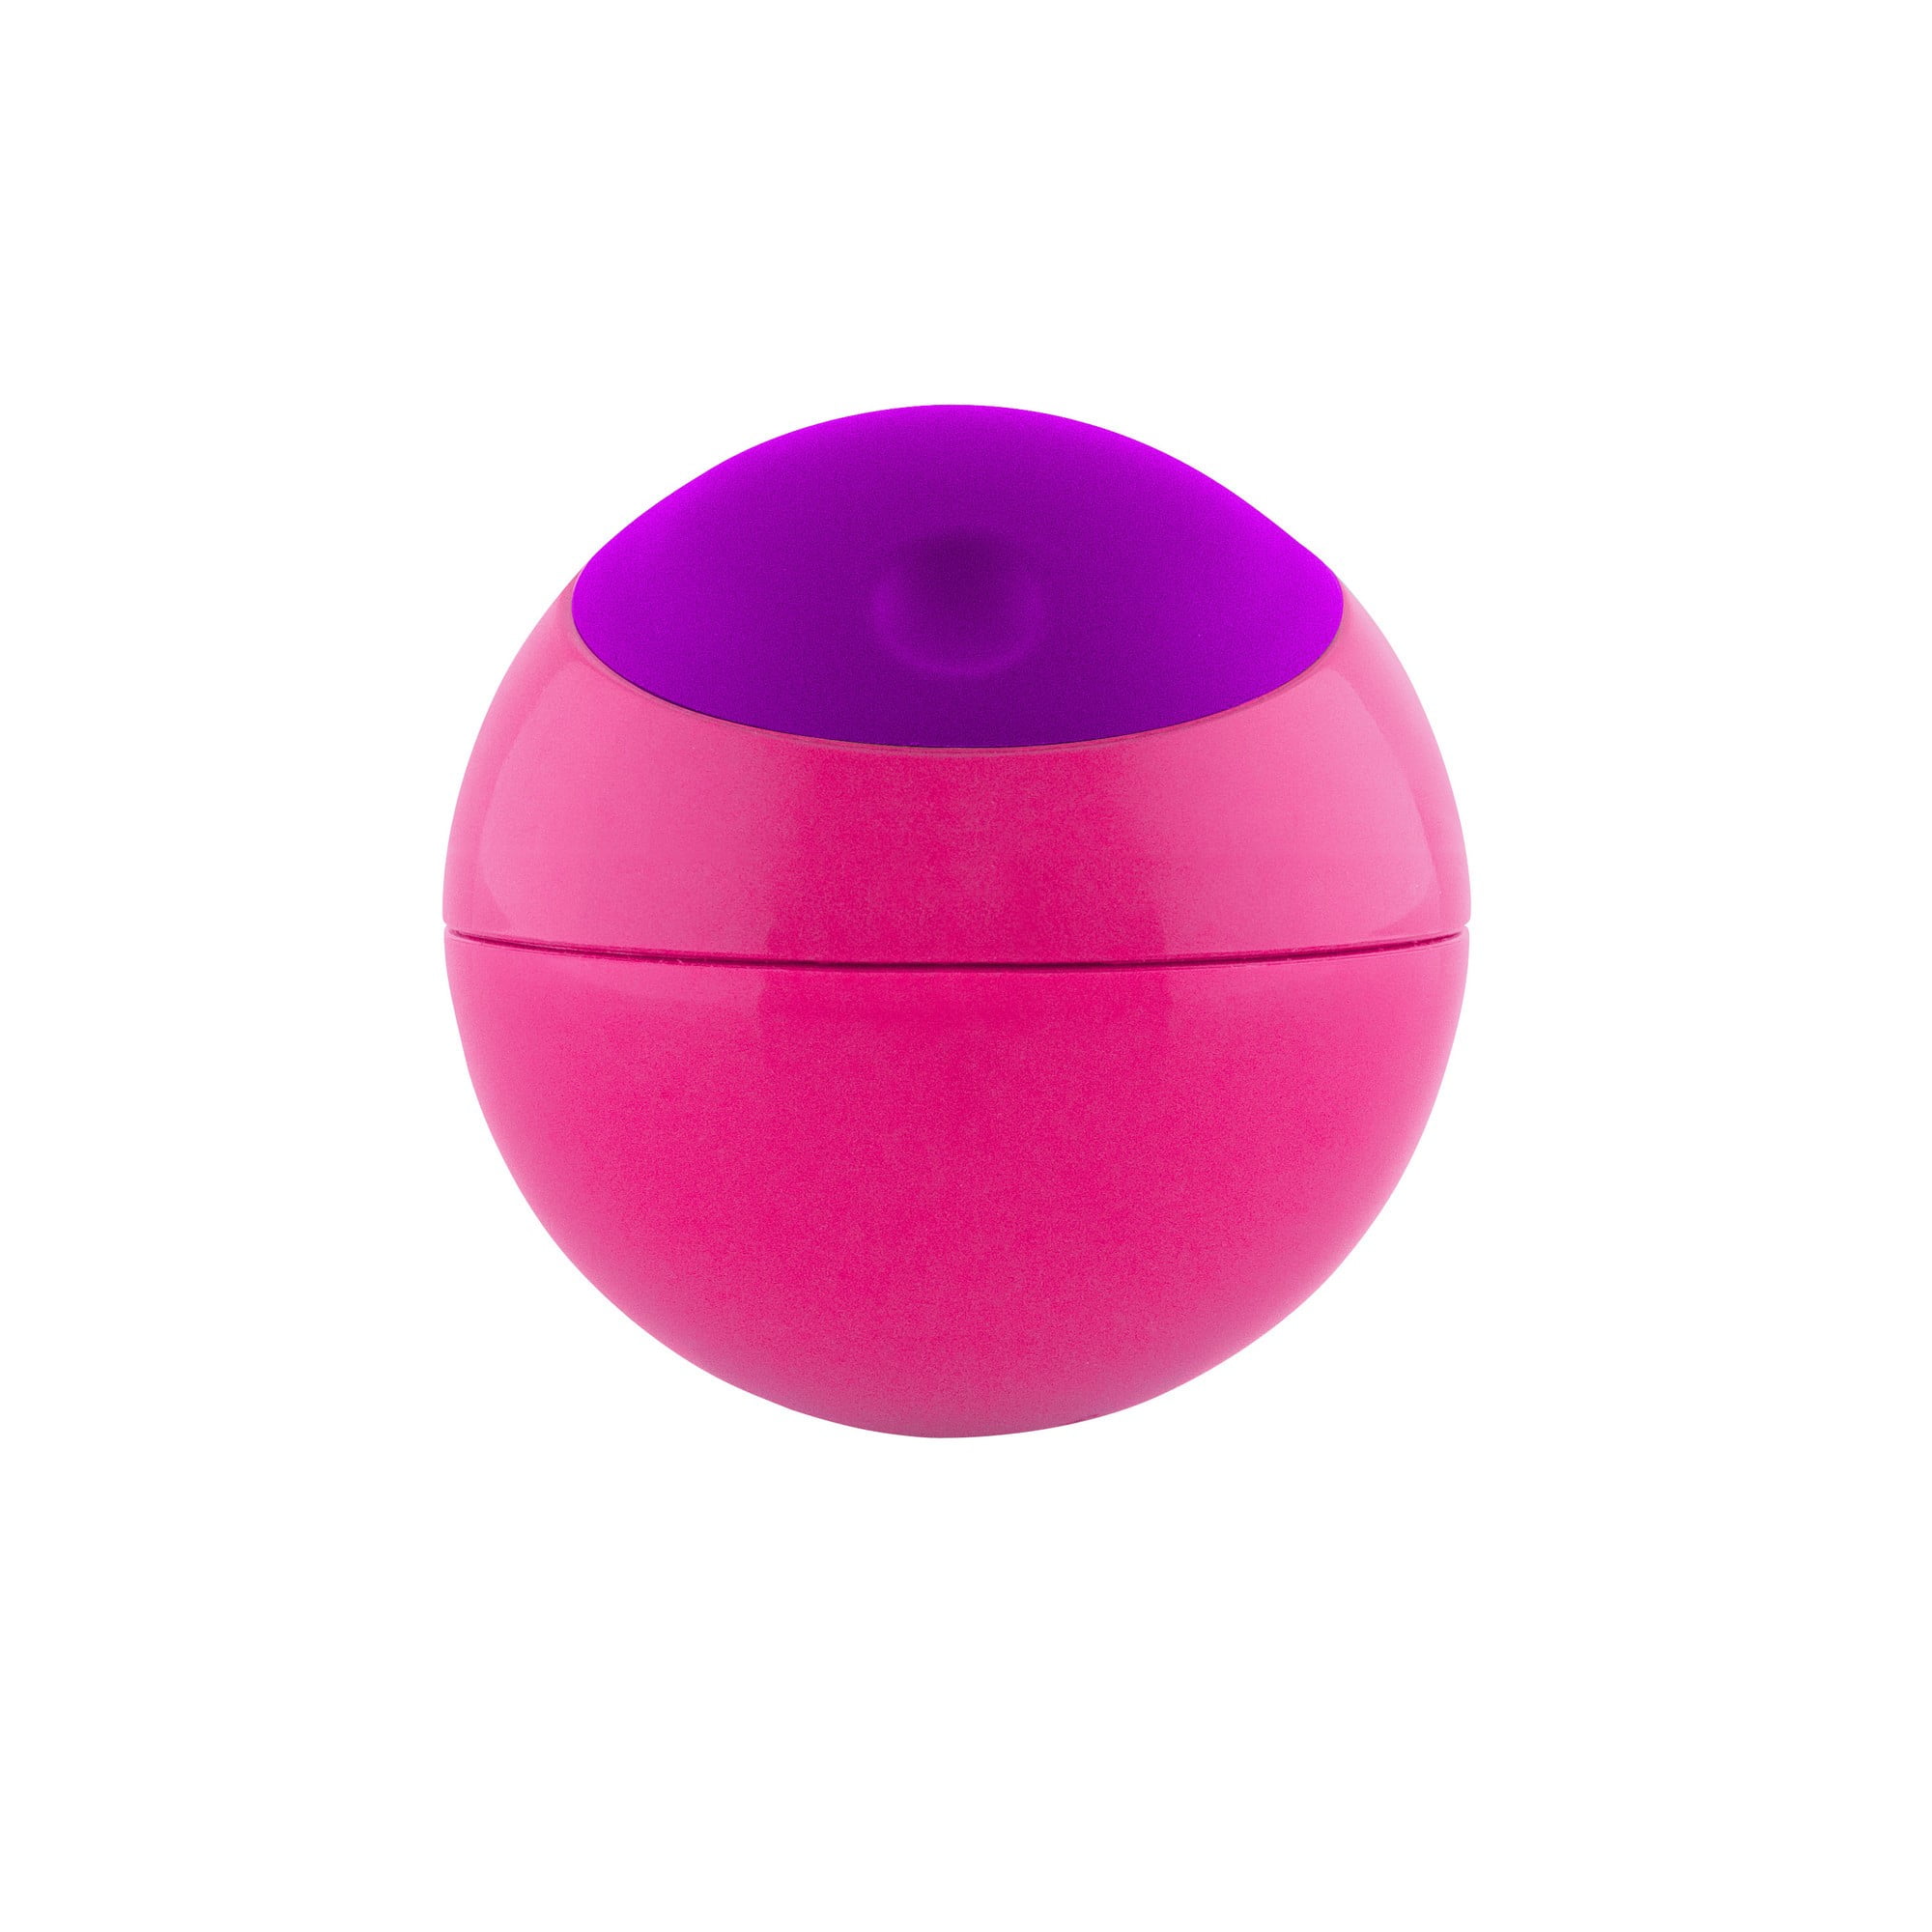 Boon Snack Ball Snack Cup, Pink - Walmart.com